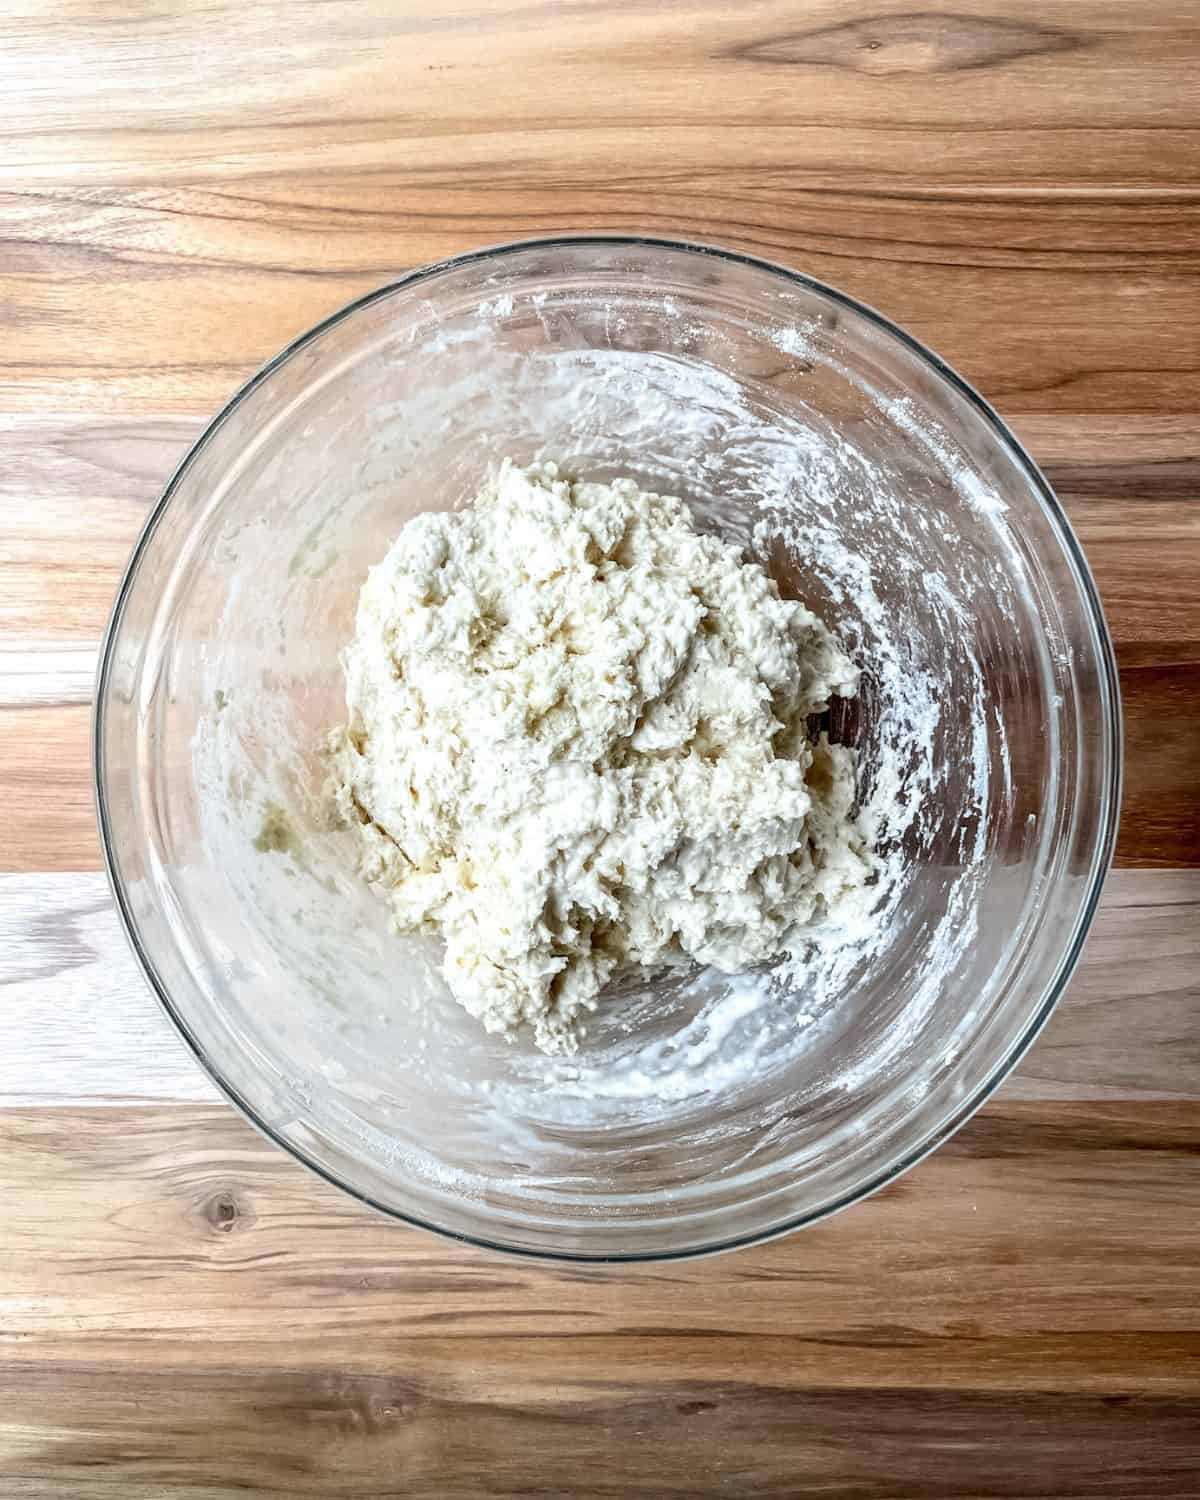 Flour, butter and milk mixed into a ball of dough in a glass bowl.